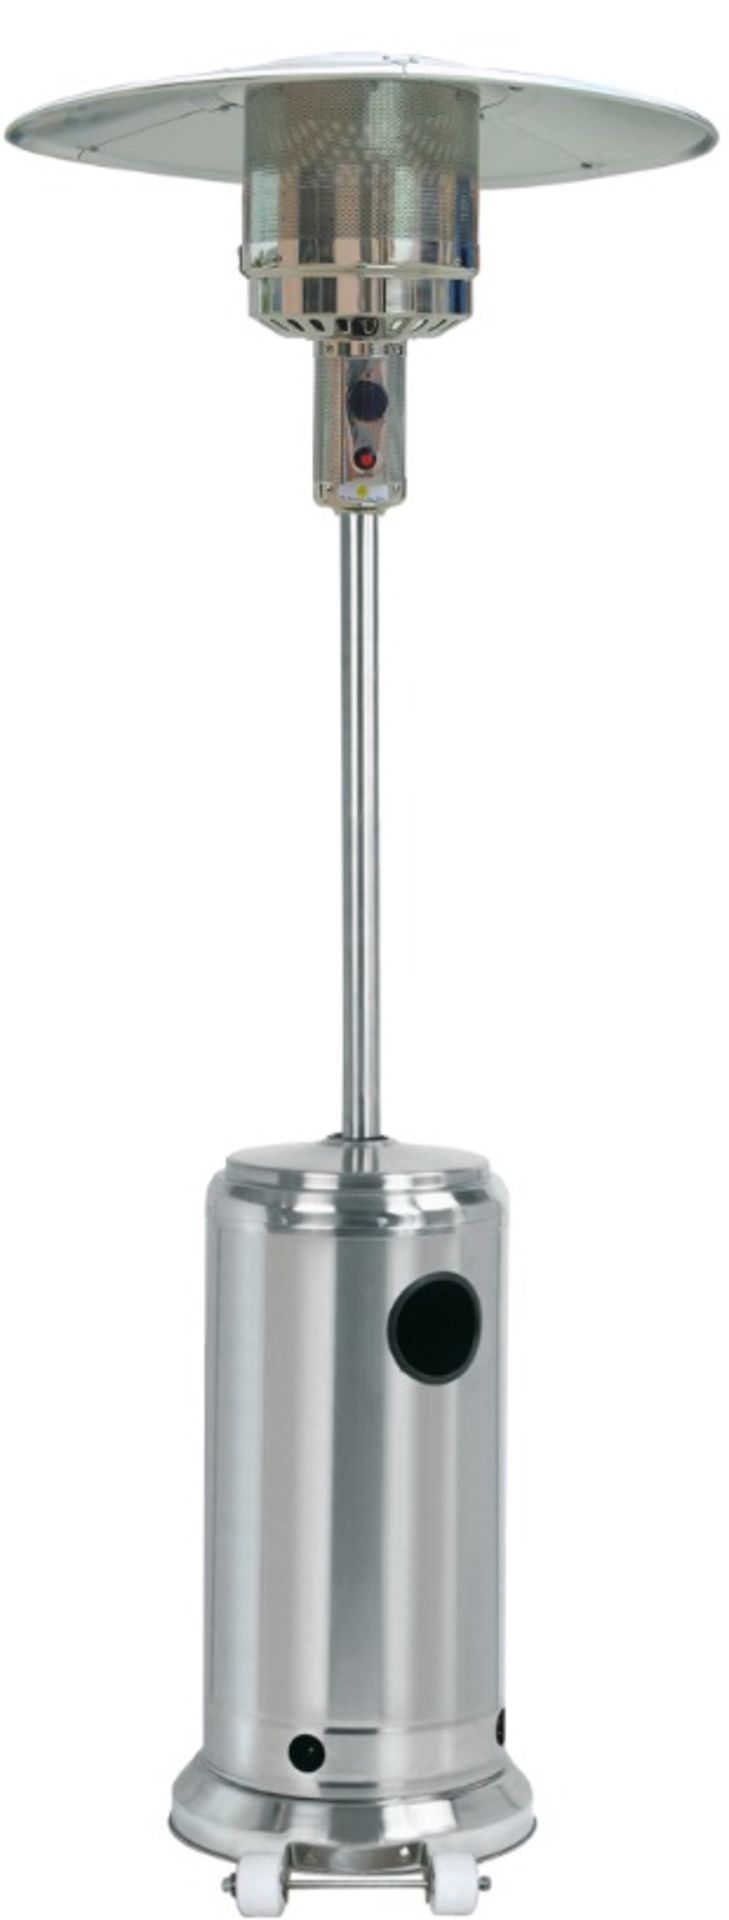 1 x Brand New & Boxed 13KW Stainless Steel Gas Patio Heater C/W regulator and wheels. - Image 2 of 2